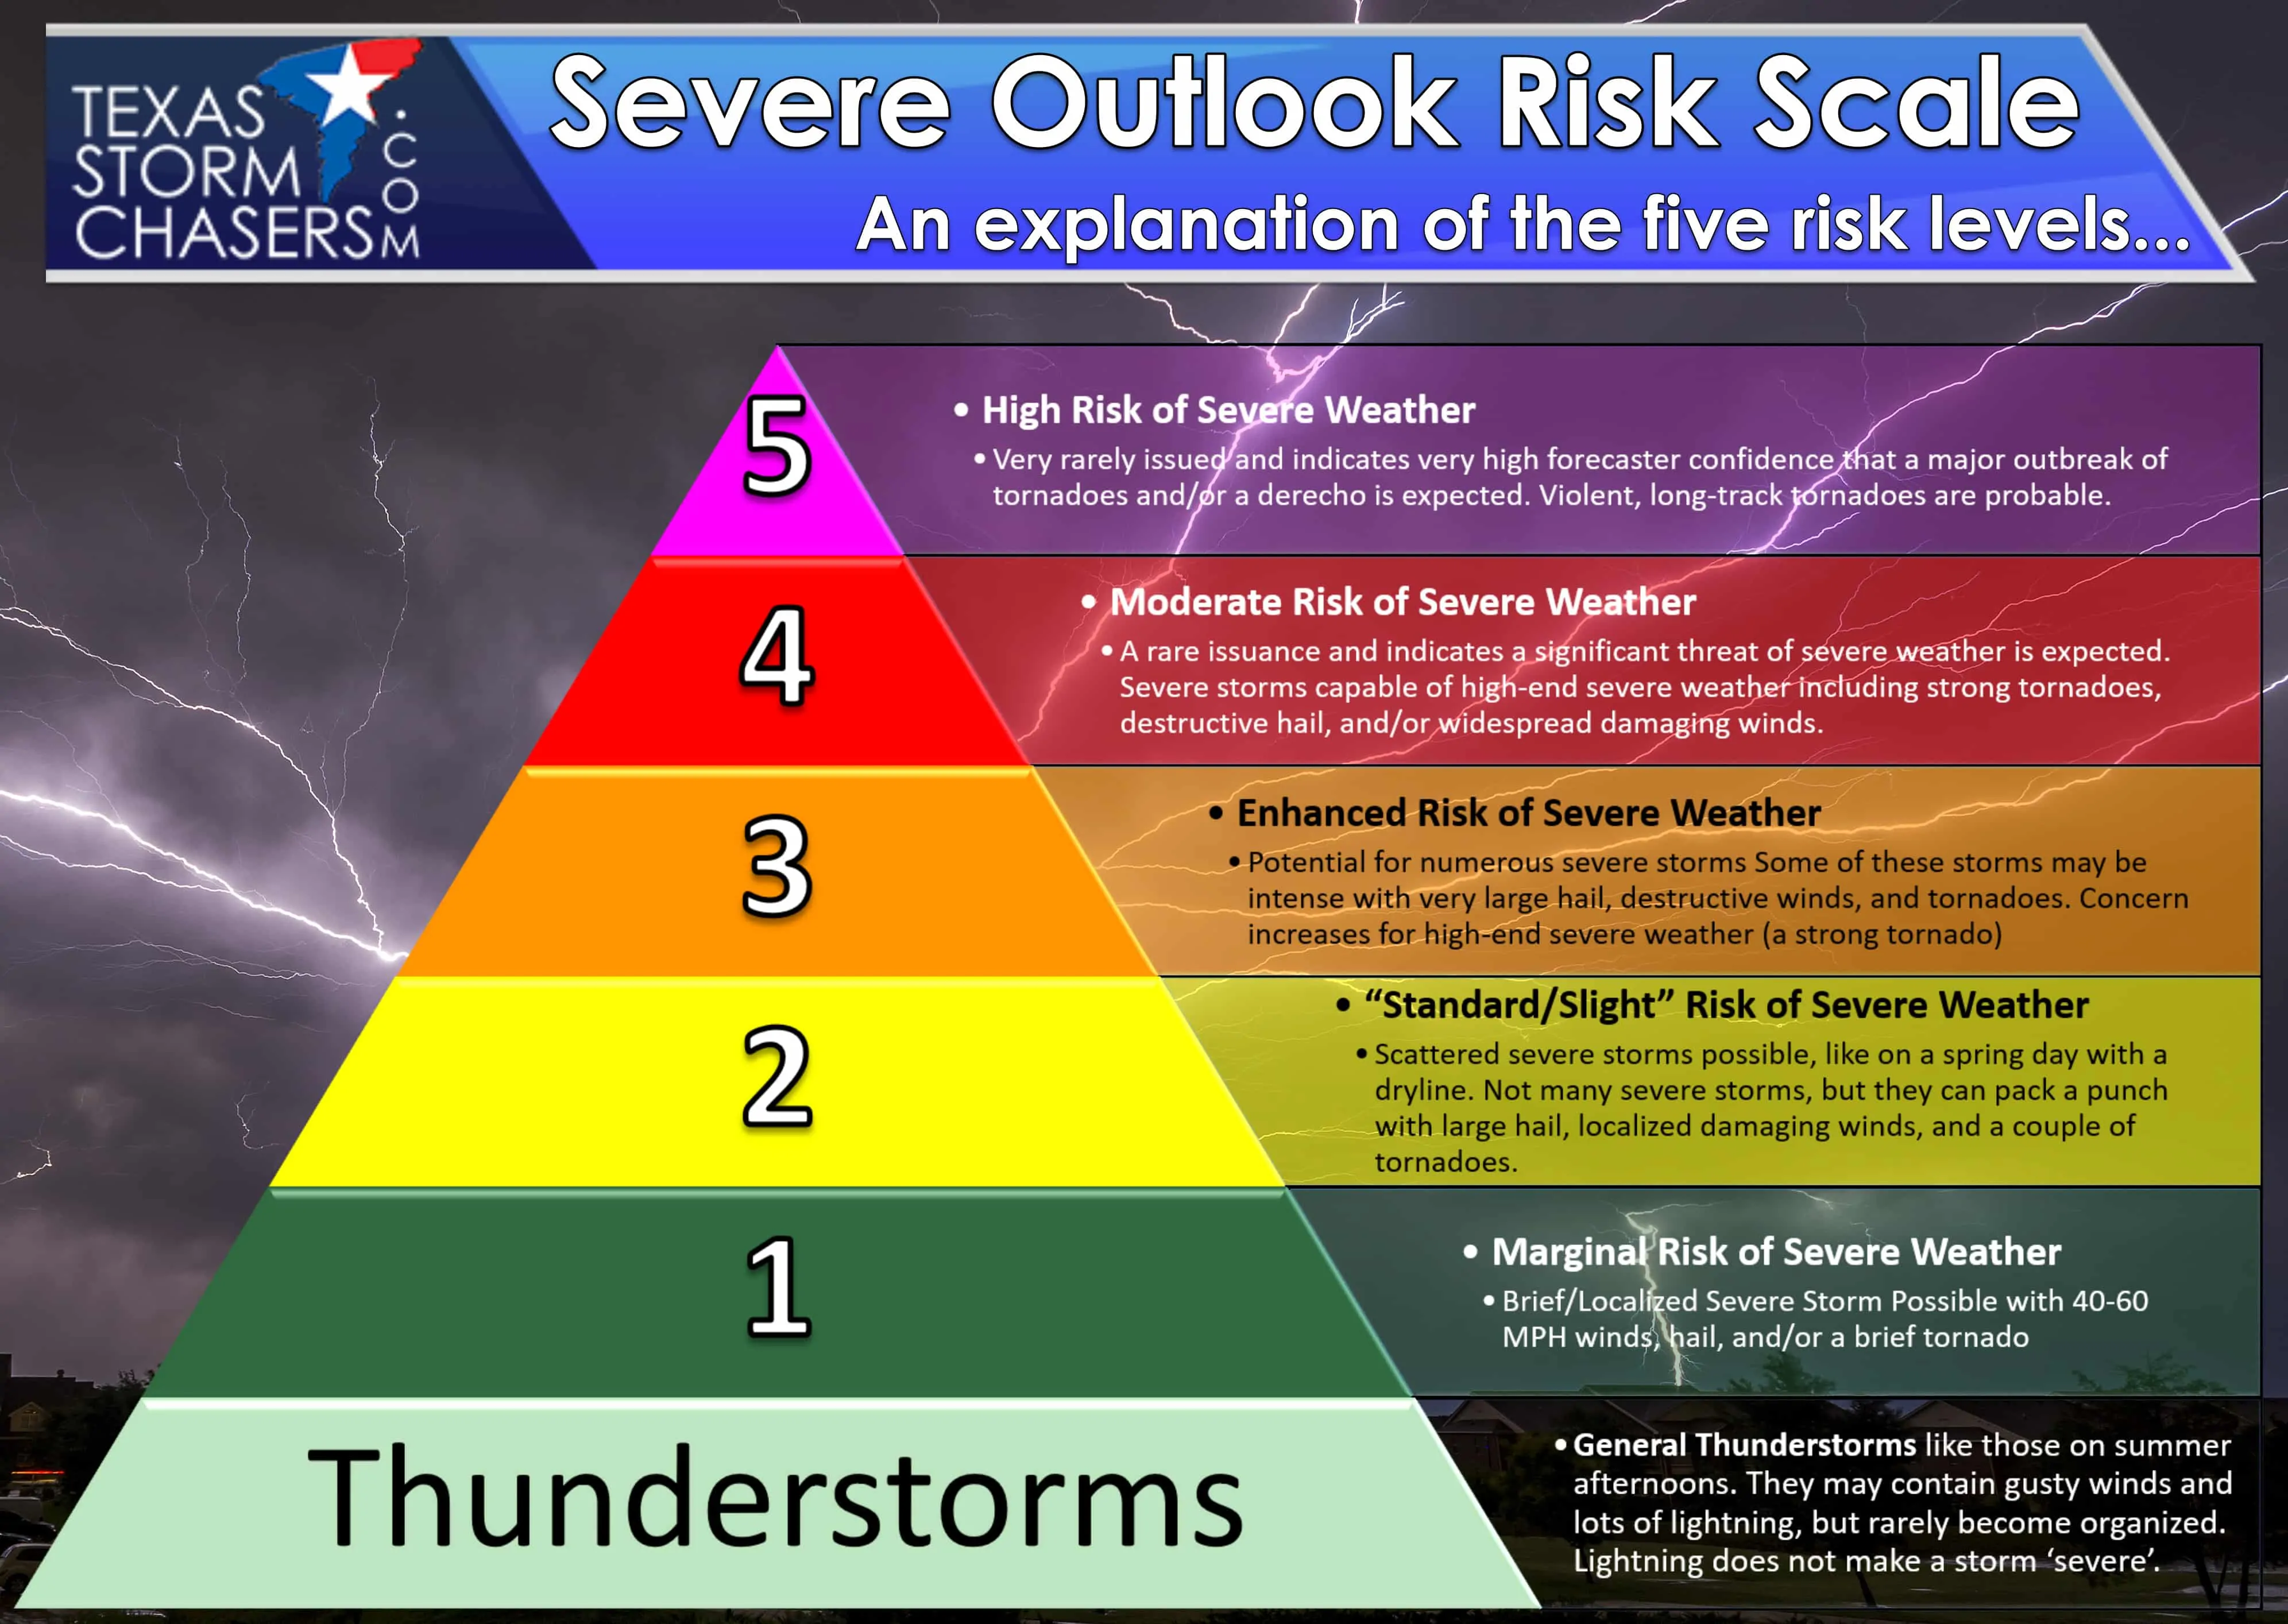 The severe weather outlook risk scale